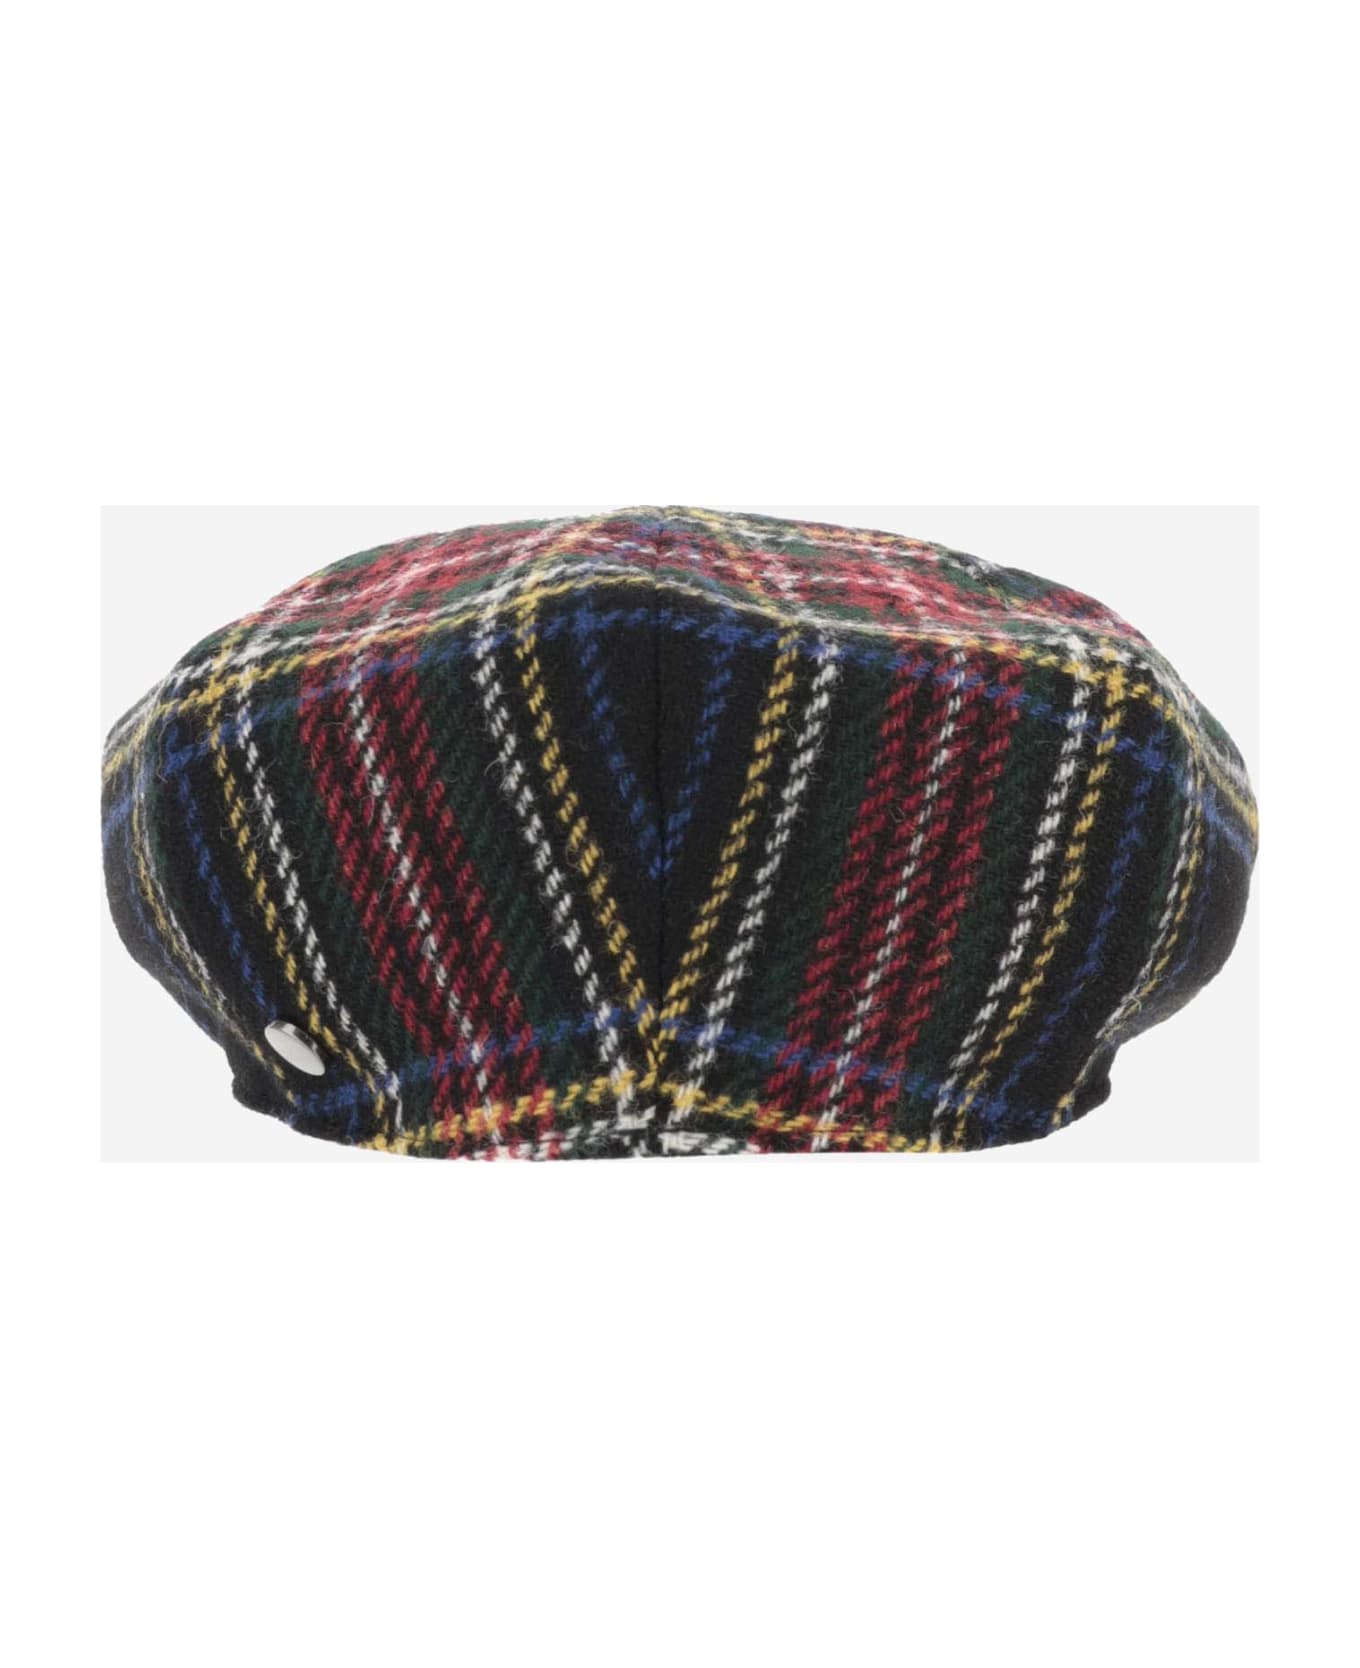 Stetson Wool Cap With Check Pattern - GREEN CHECK 帽子